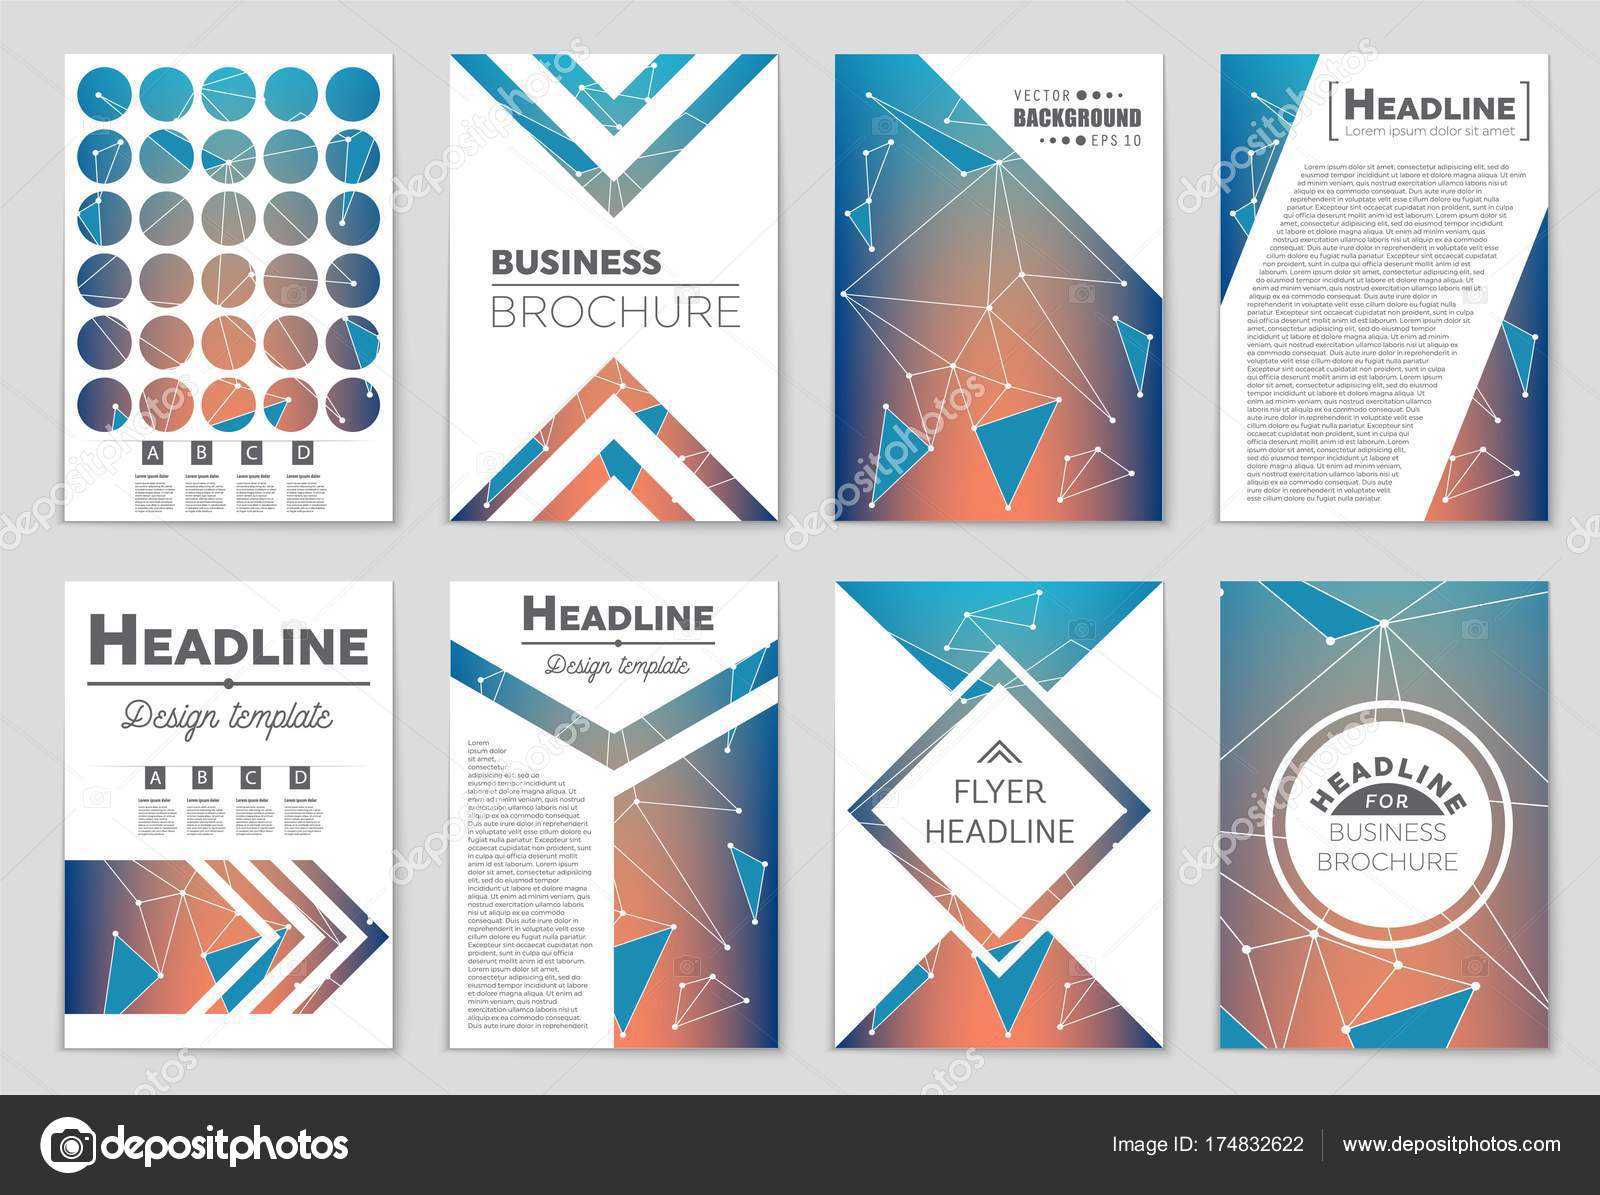 Half Page Ad Template Word. 3 Page Media Kit Template 05 Ad In Quarter Sheet Flyer Template Word